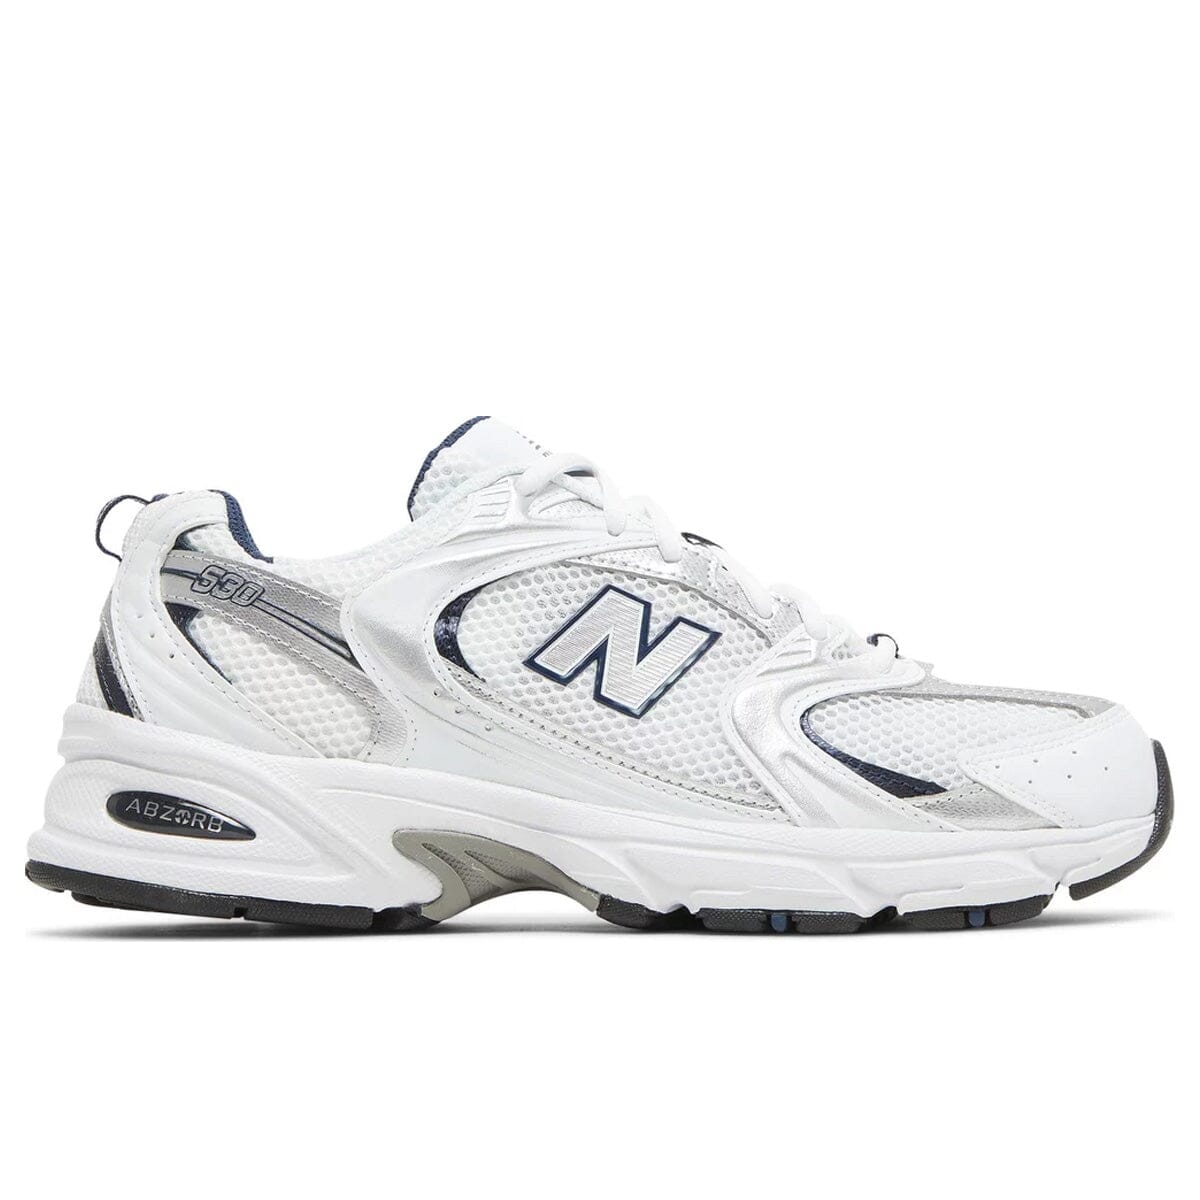 New Balance 530 White Silver Navy New Balance 530 Blizz Sneakers 